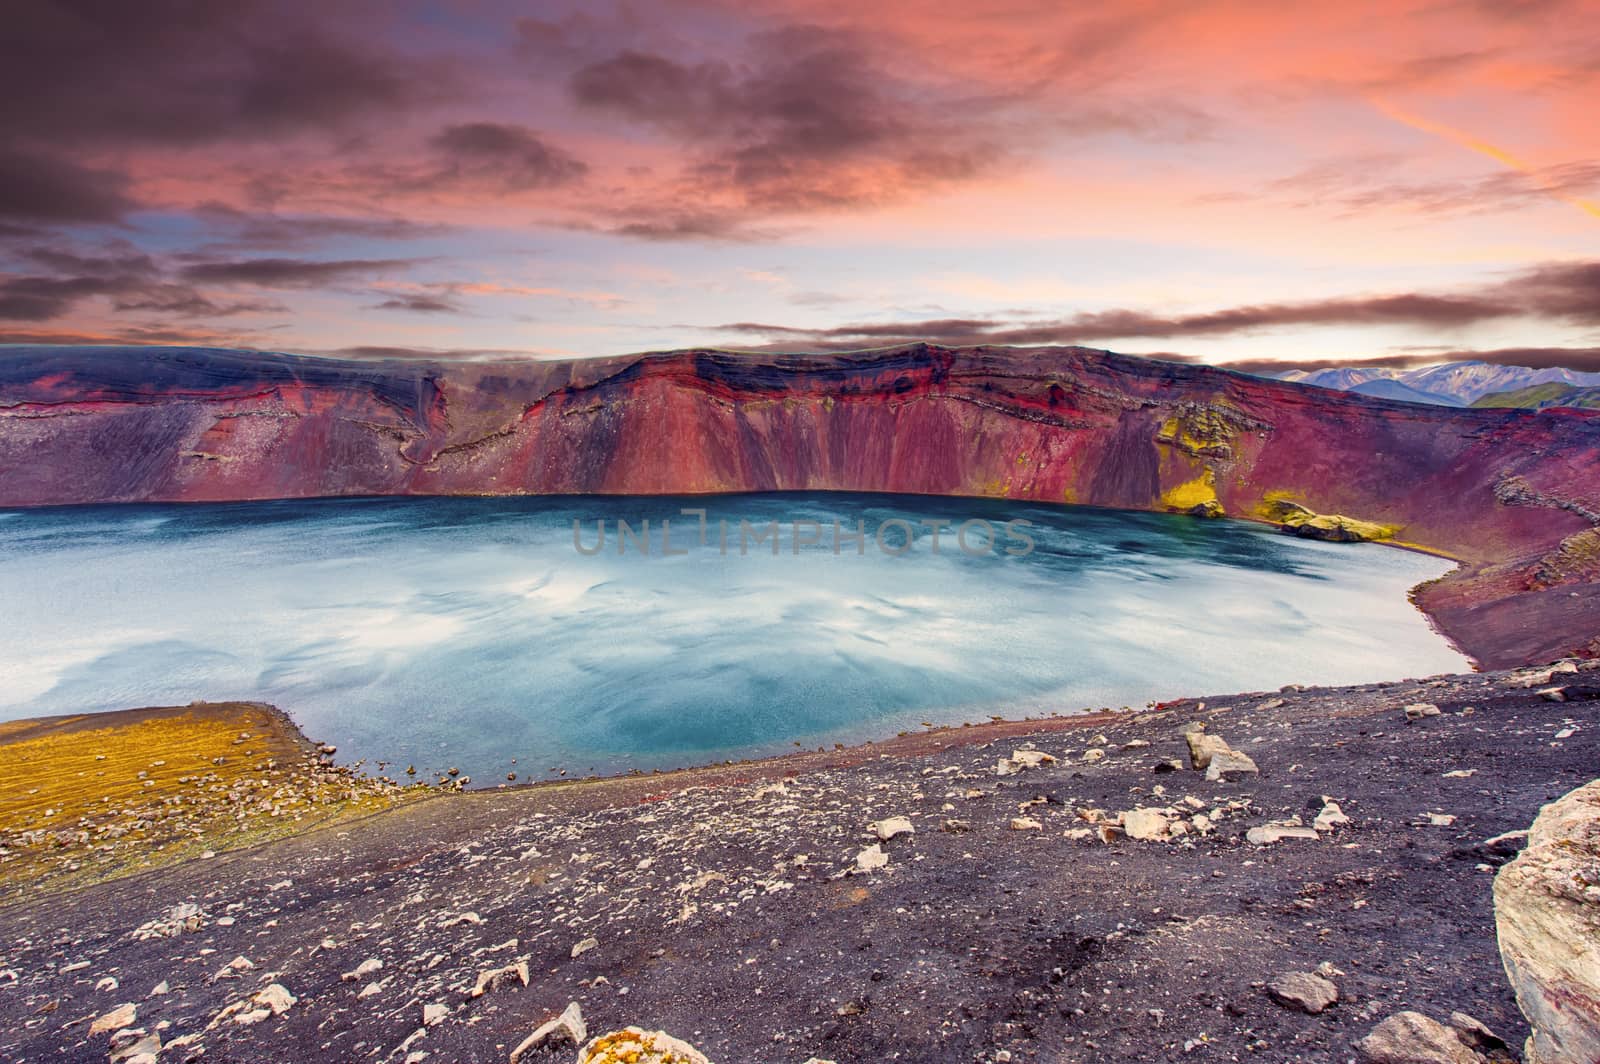 Sunset over Ljotipollur lake in the crater of volcano in Landmannalaugar, Highlands of Iceland